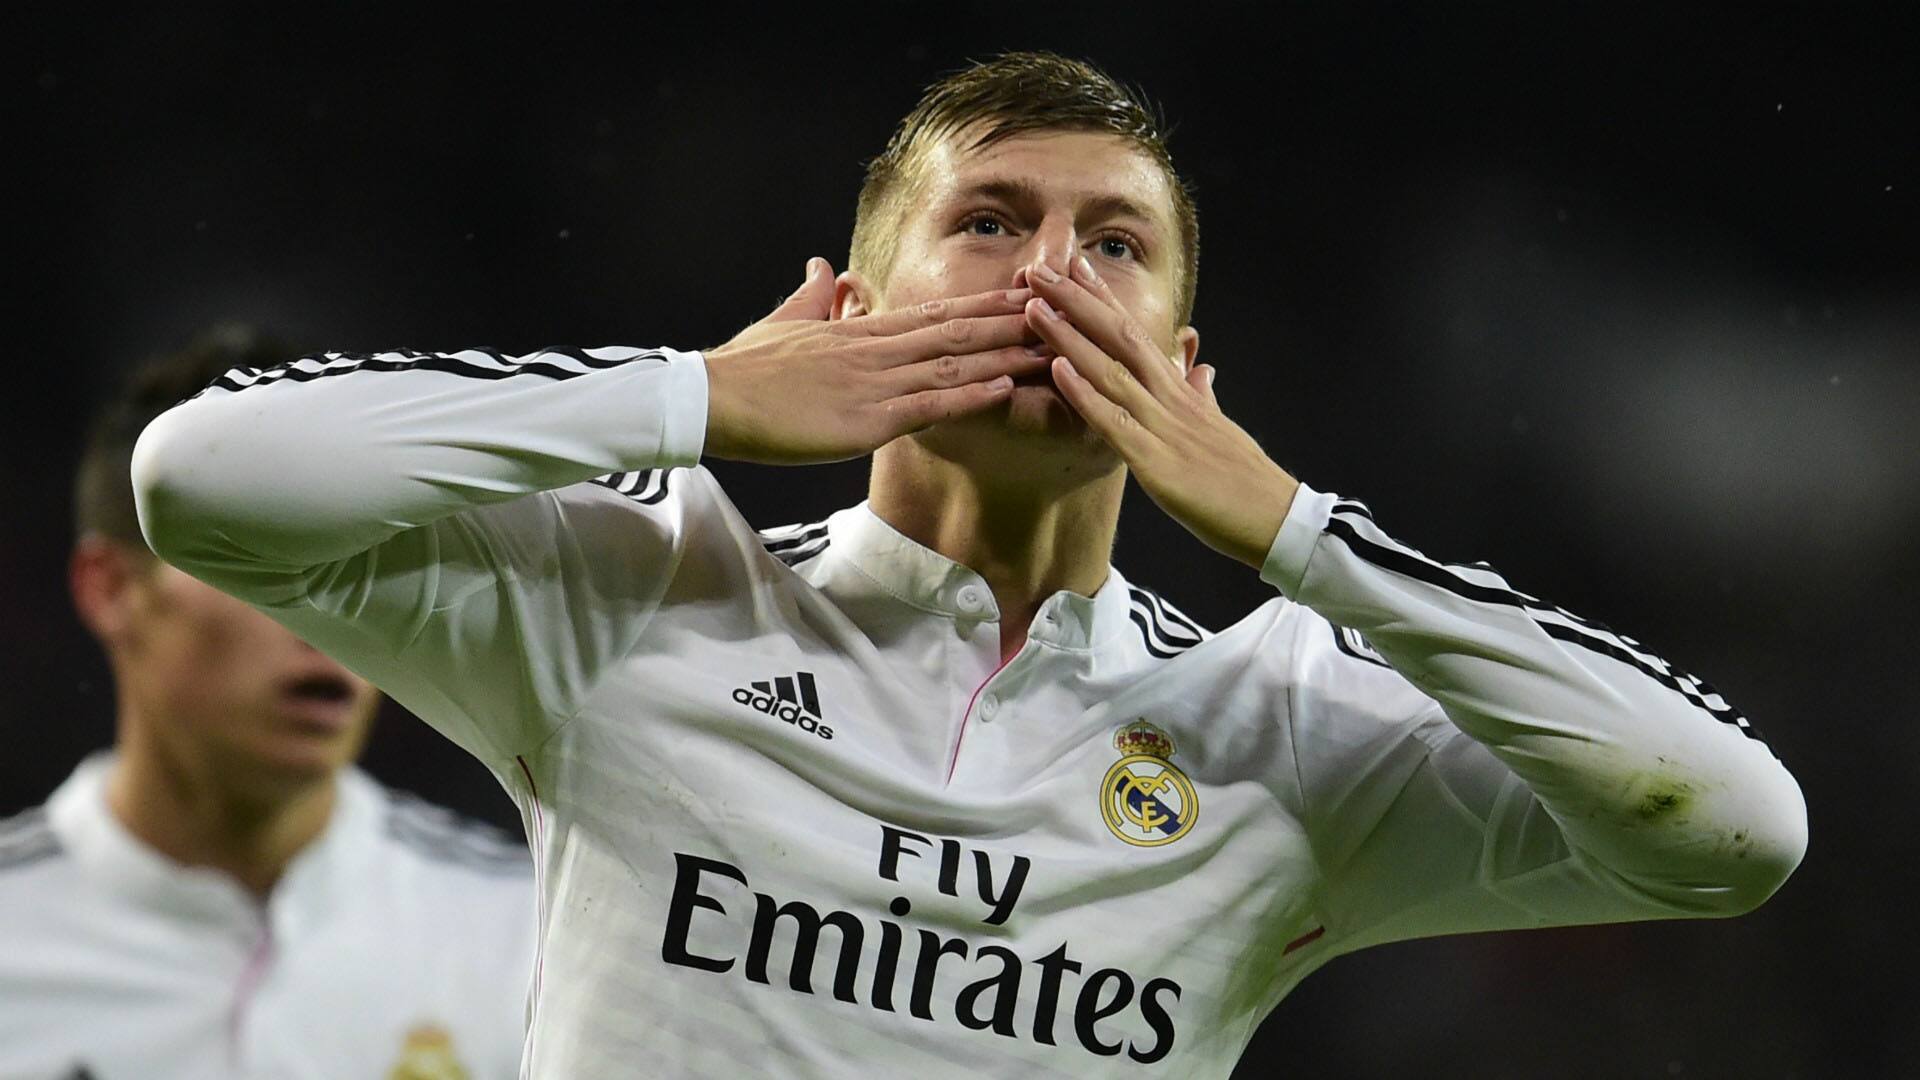 Interview with toni kroos